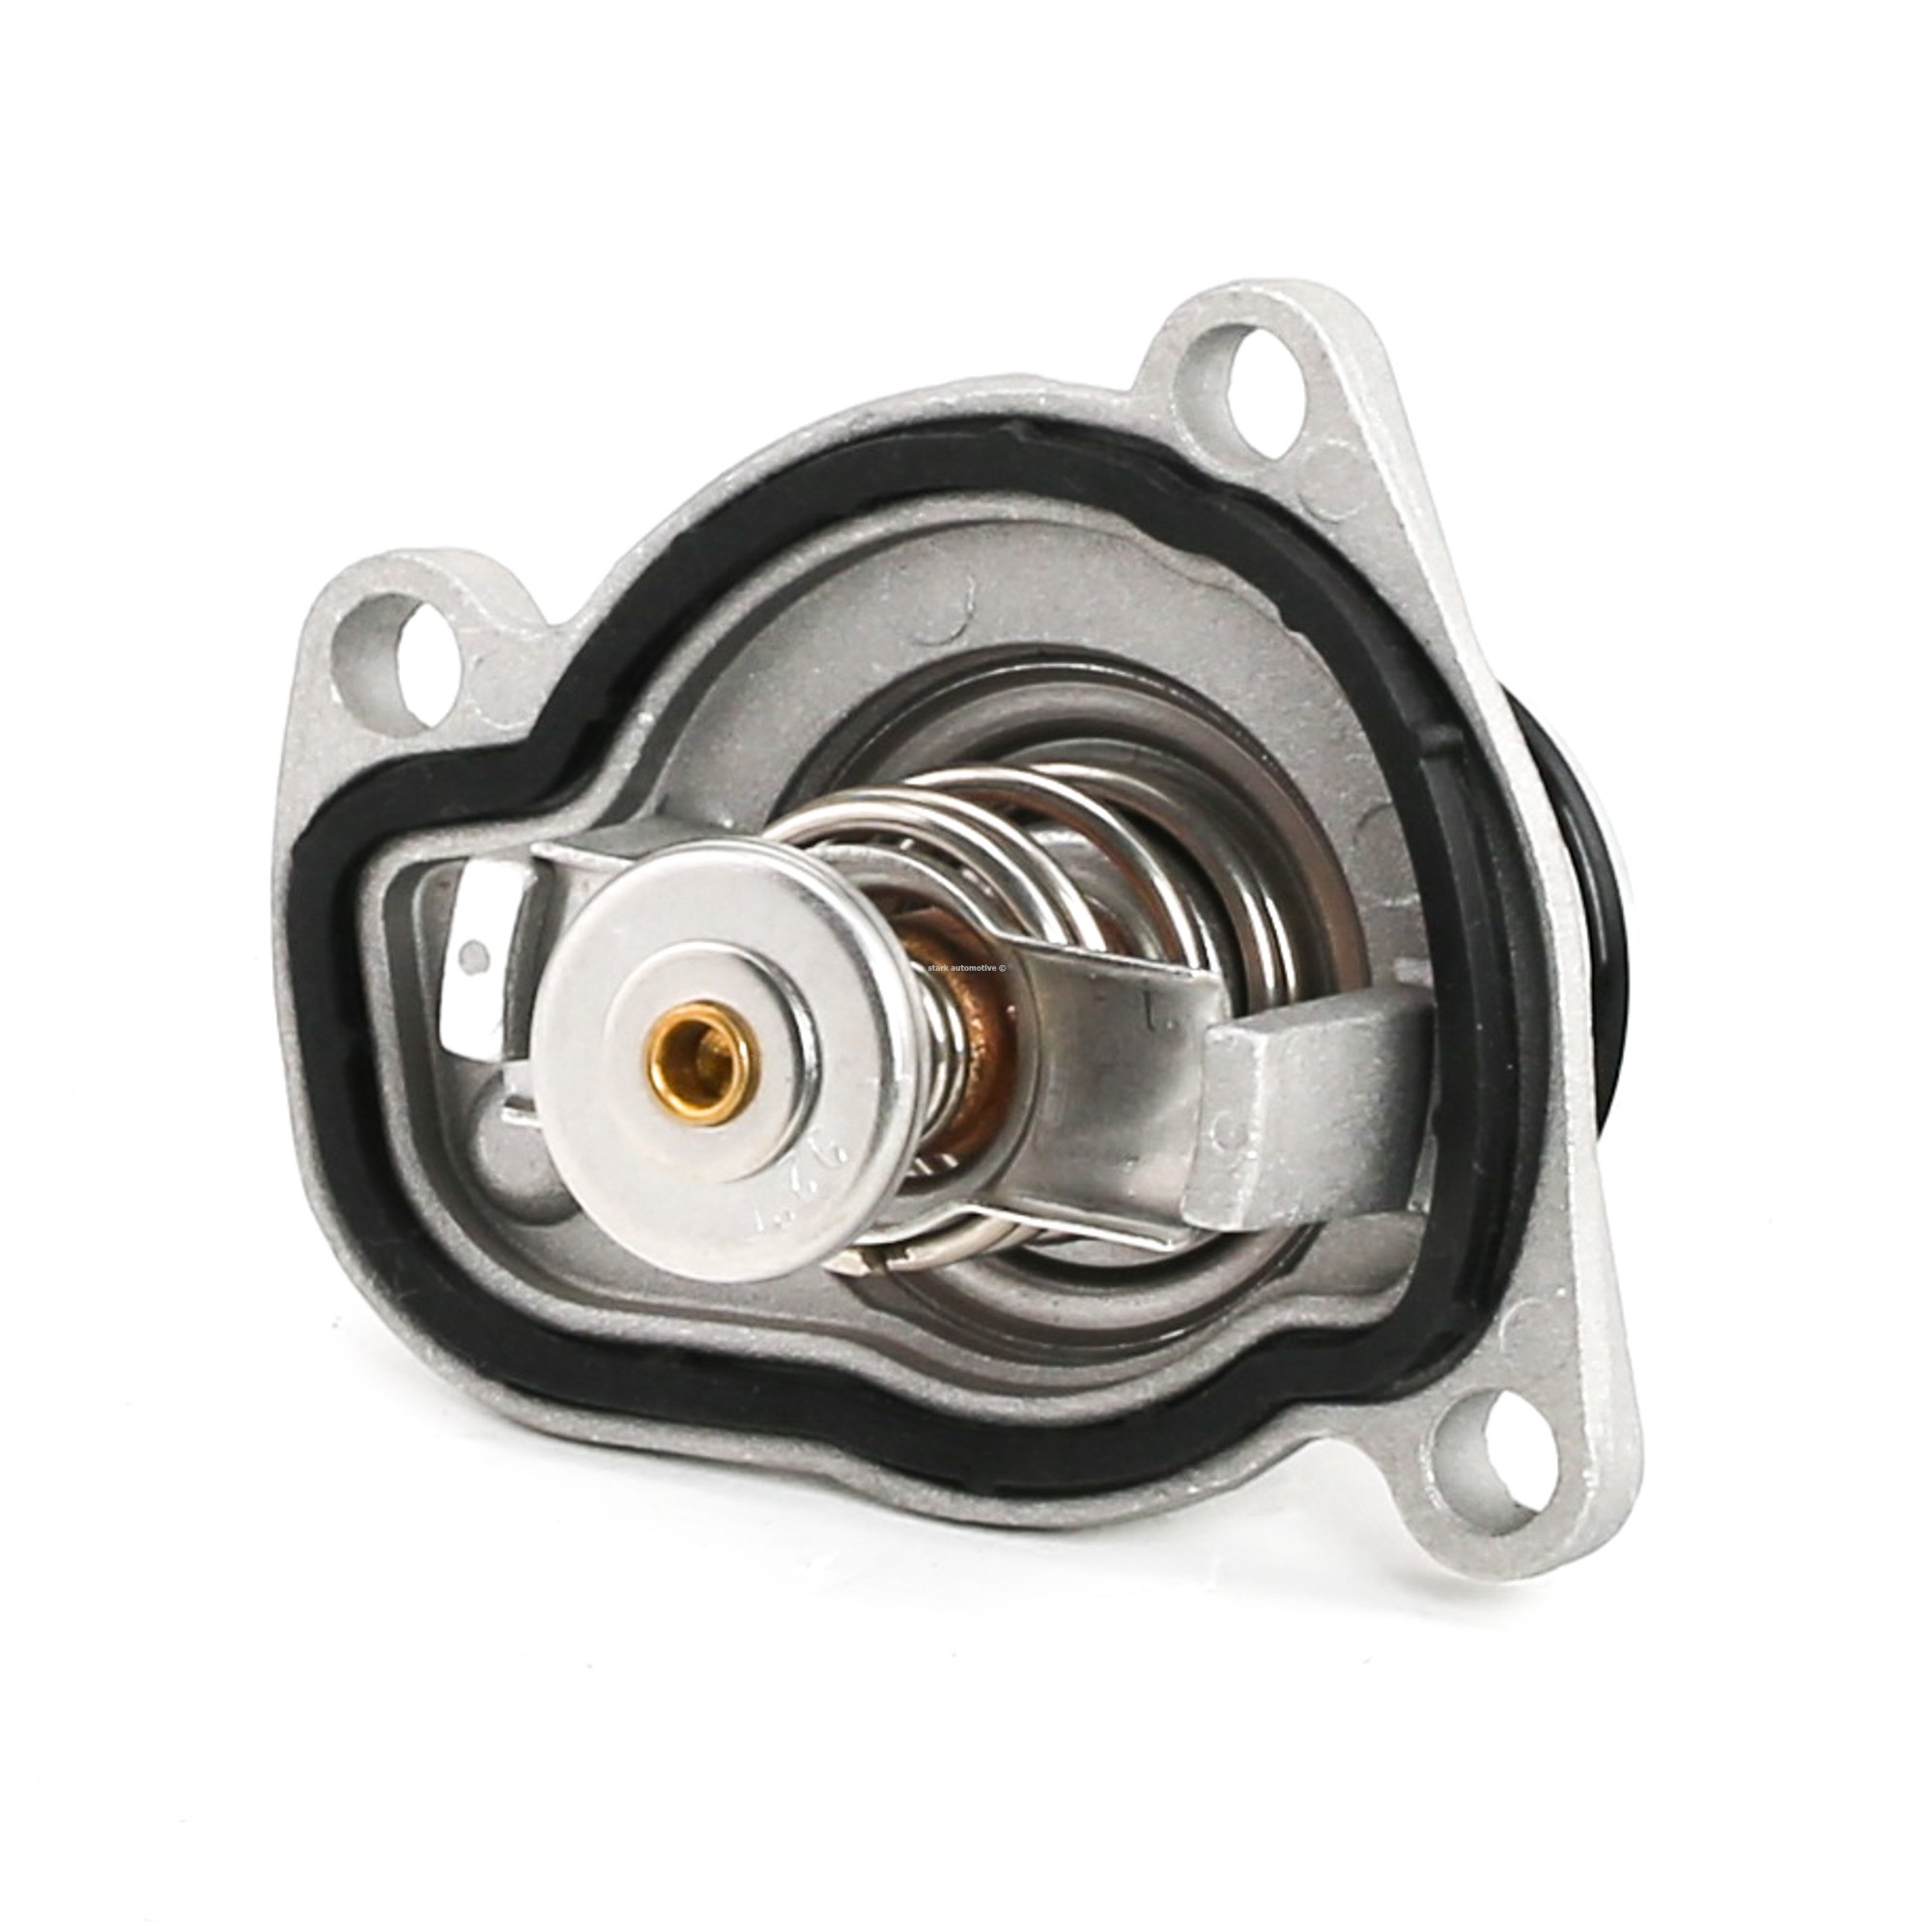 STARK SKTC-0560175 Engine thermostat Opening Temperature: 92°C, with seal, Metal Housing